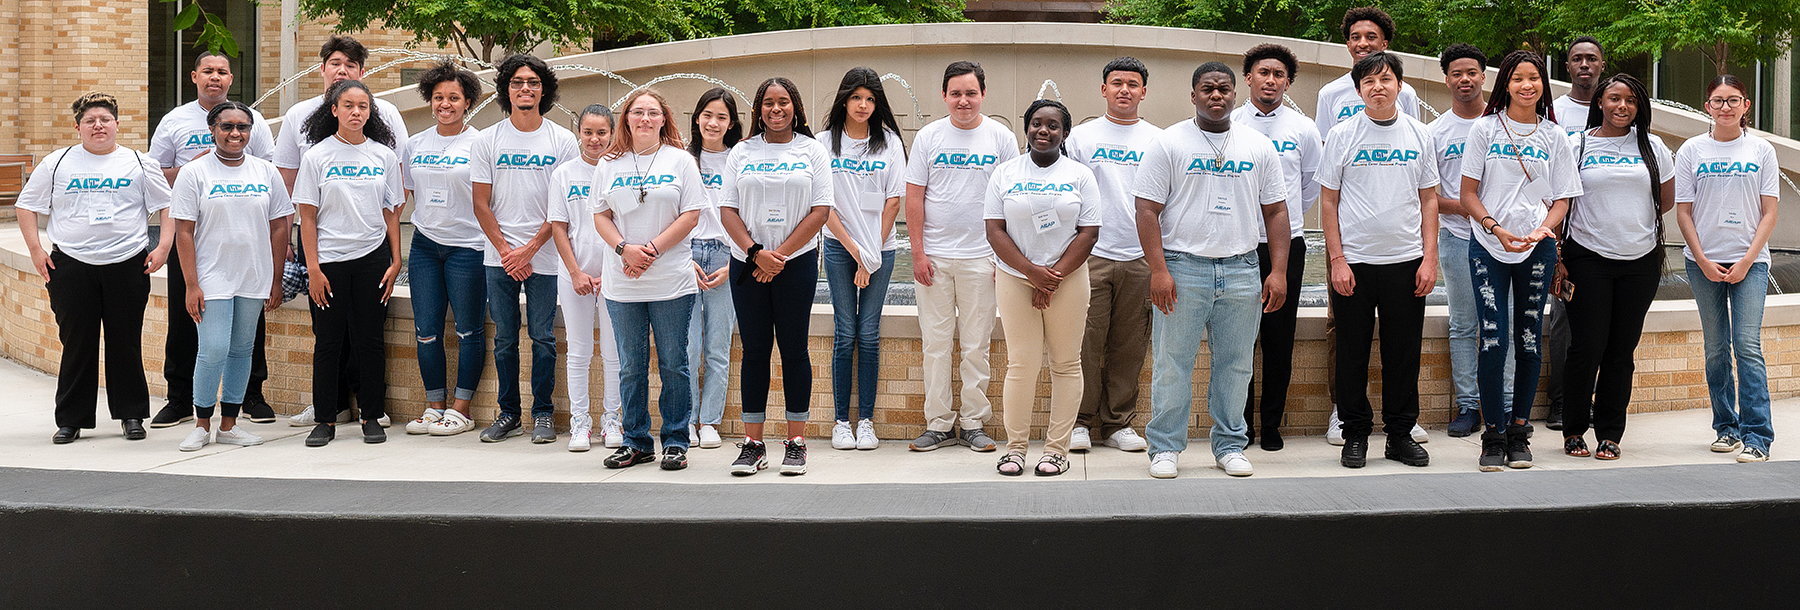 Section Image: Students in ACAP tshirts by fountain 